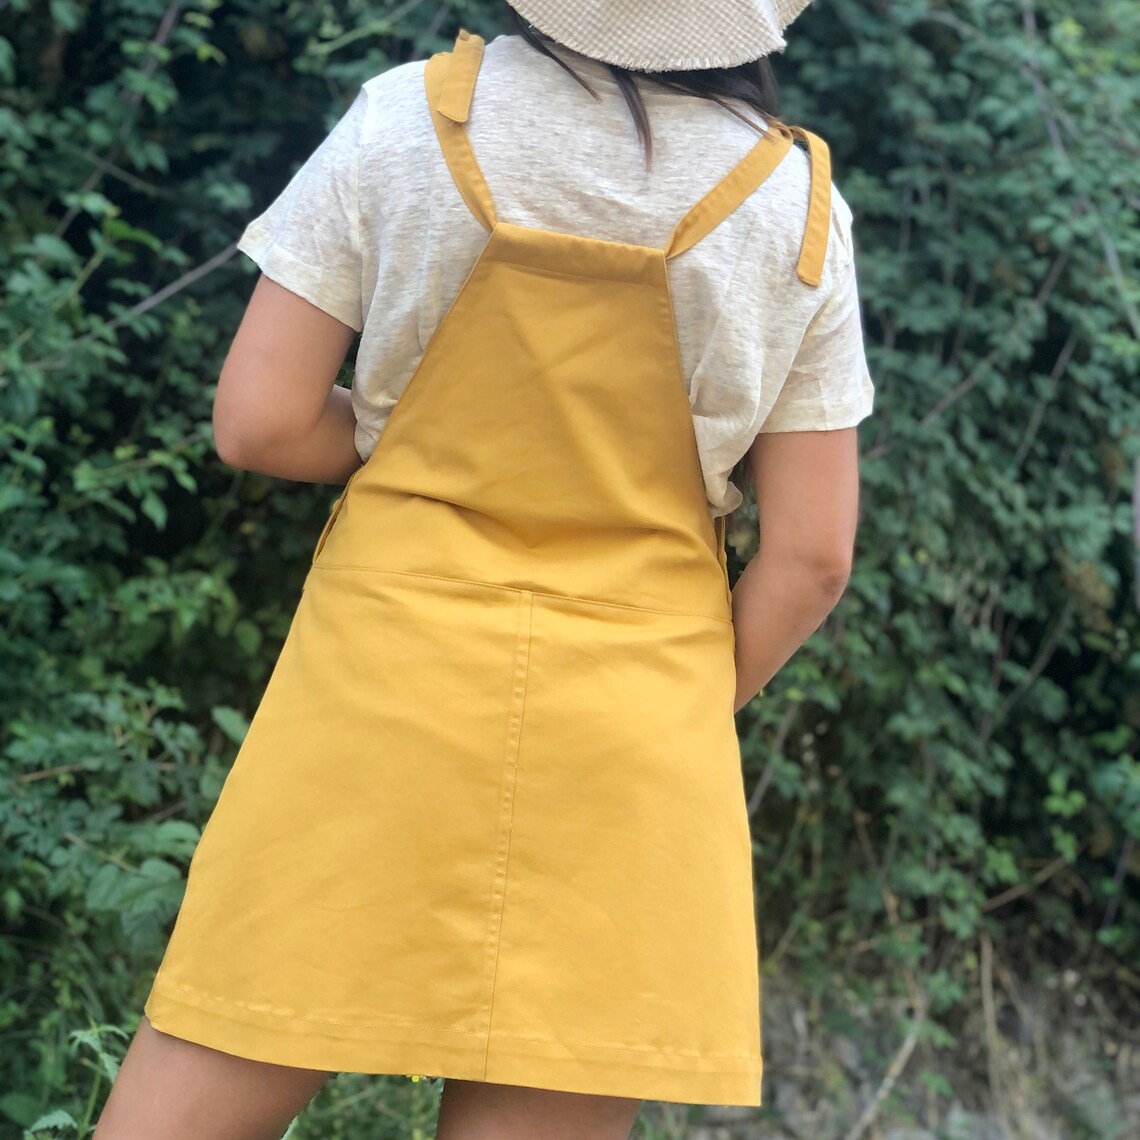 Dungarees for women mustard dungarees embroidered daisy | Etsy